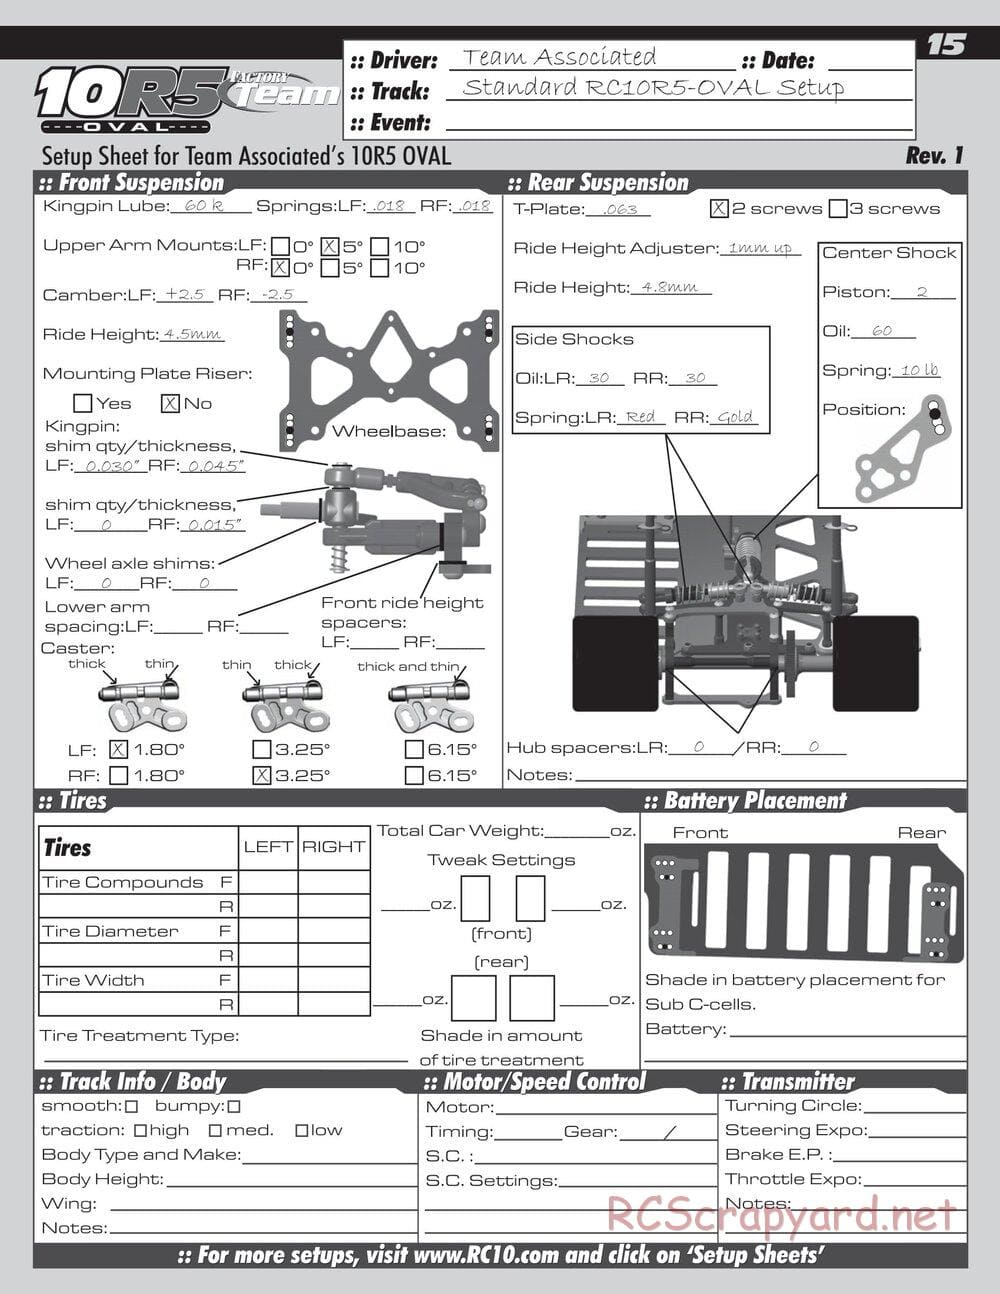 Team Associated - RC10R5 Oval Factory Team - Manual - Page 15